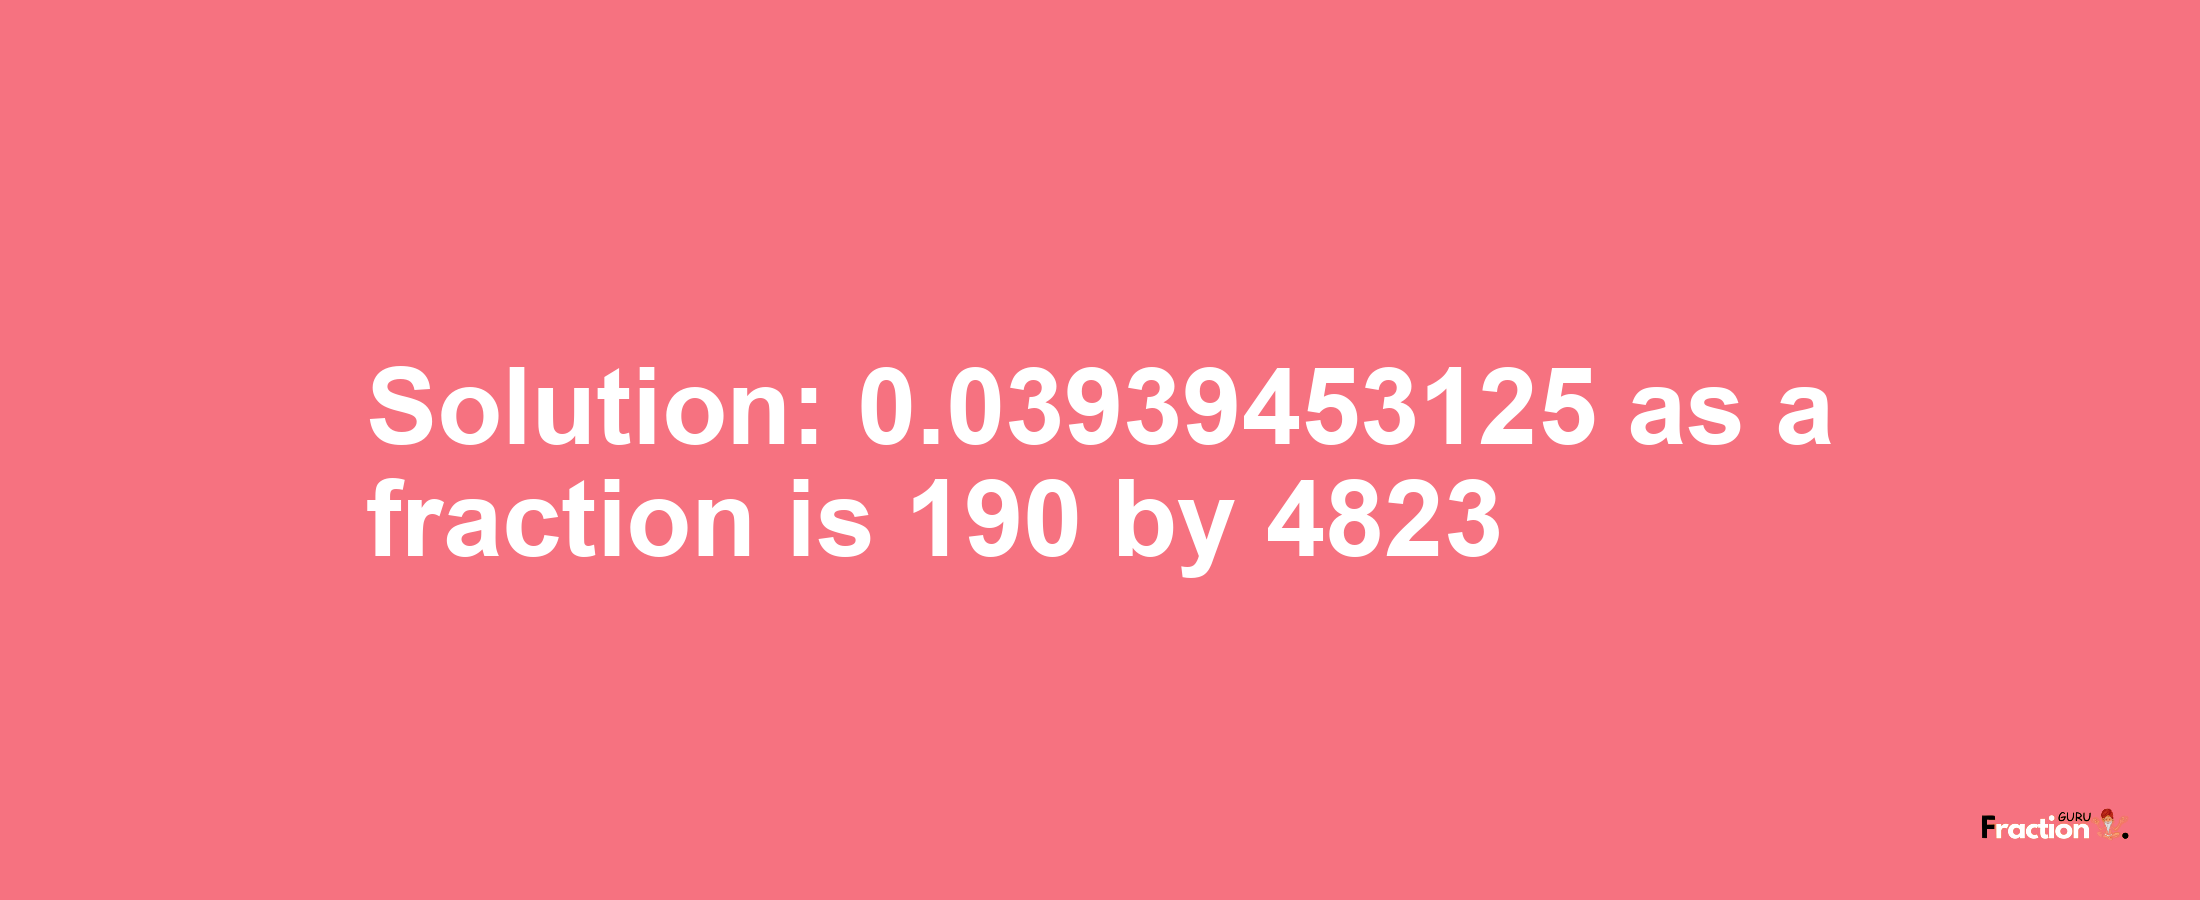 Solution:0.03939453125 as a fraction is 190/4823